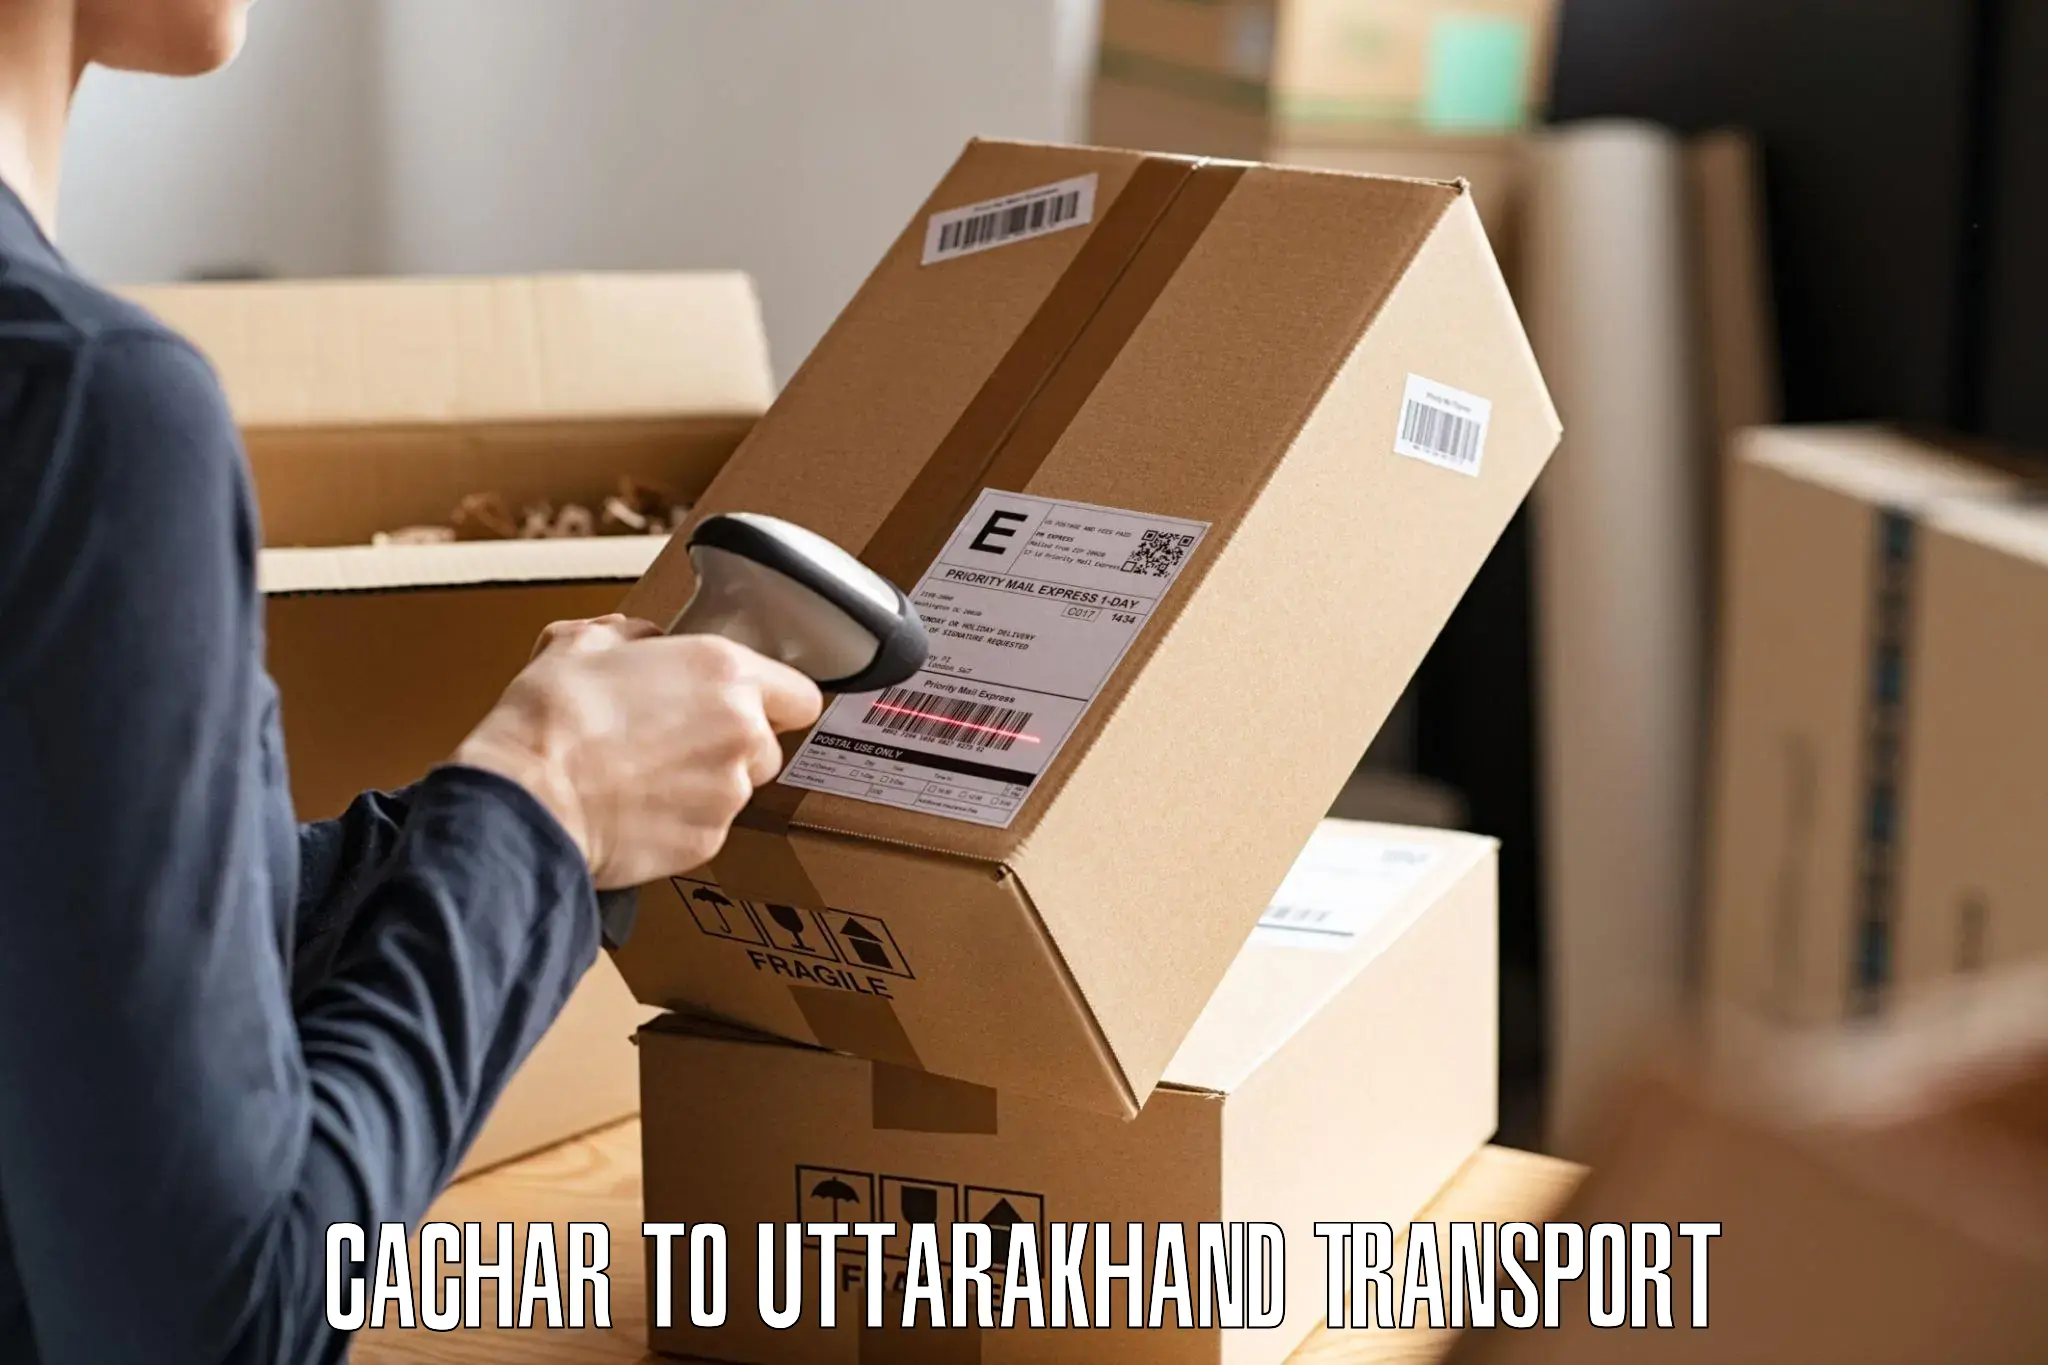 Part load transport service in India Cachar to Uttarakhand